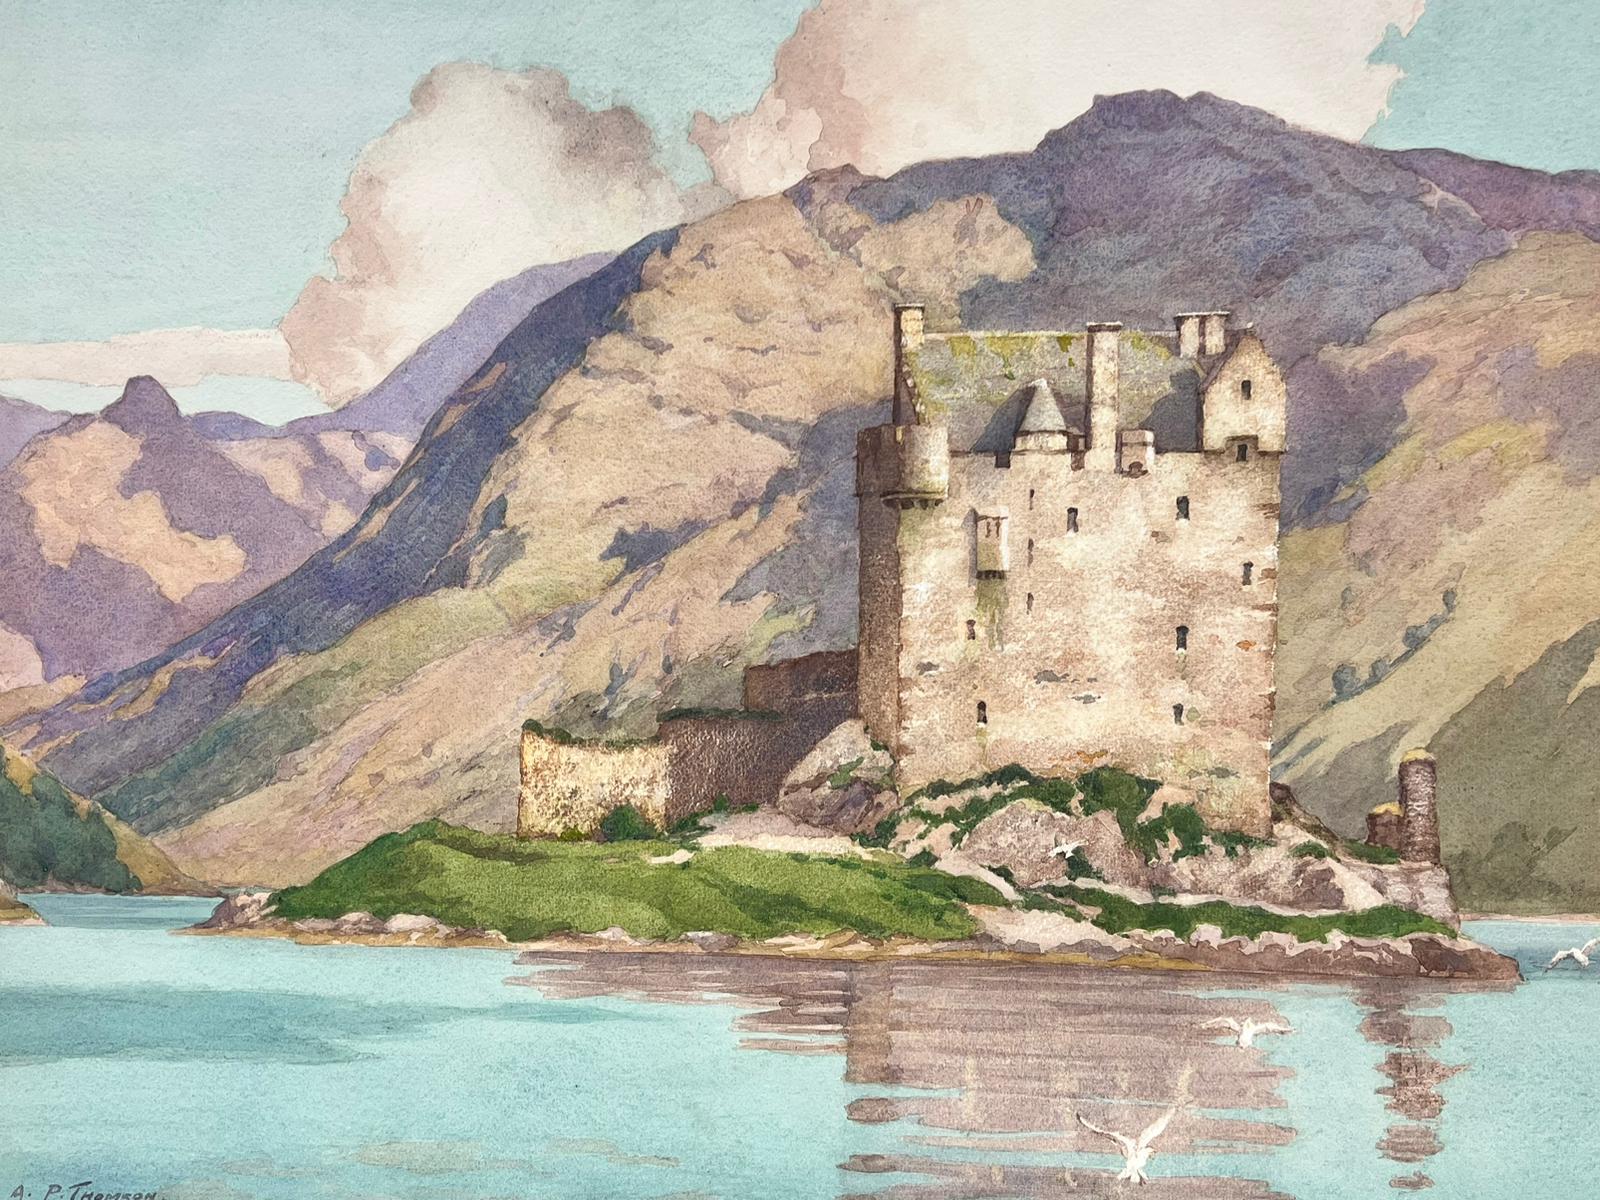 Eilean Donan Castle
Scottish School, mid 20th century
signed watercolor on board, framed
framed: 26.5 x 22.5 inches
painting: 20 x 24 inches
private collection, England
the painting is in overall very good and sound condition

Eilean Donan (Scottish